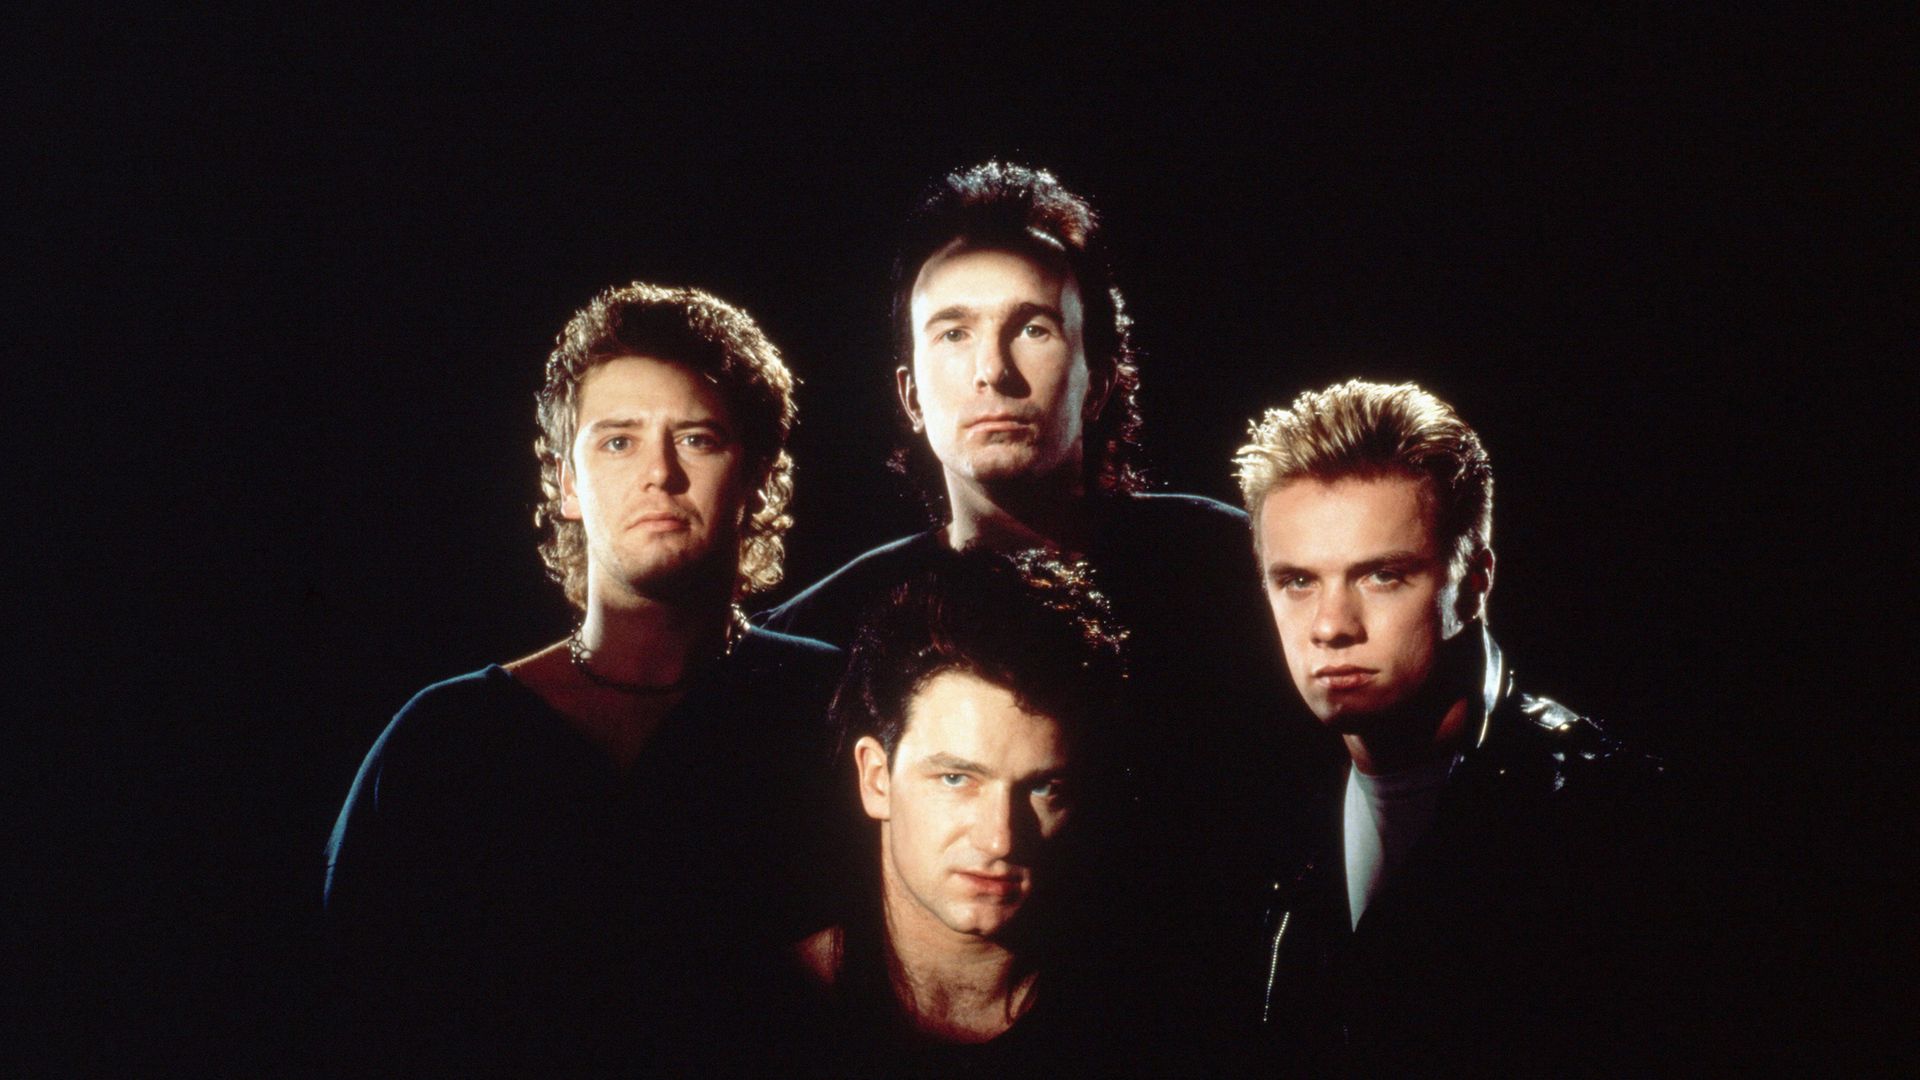 Adam Clayton (far left), The Edge (back), Bono (front) and Larry Mullen, Jr. (far right) form the rock band U2. - Credit: Corbis via Getty Images